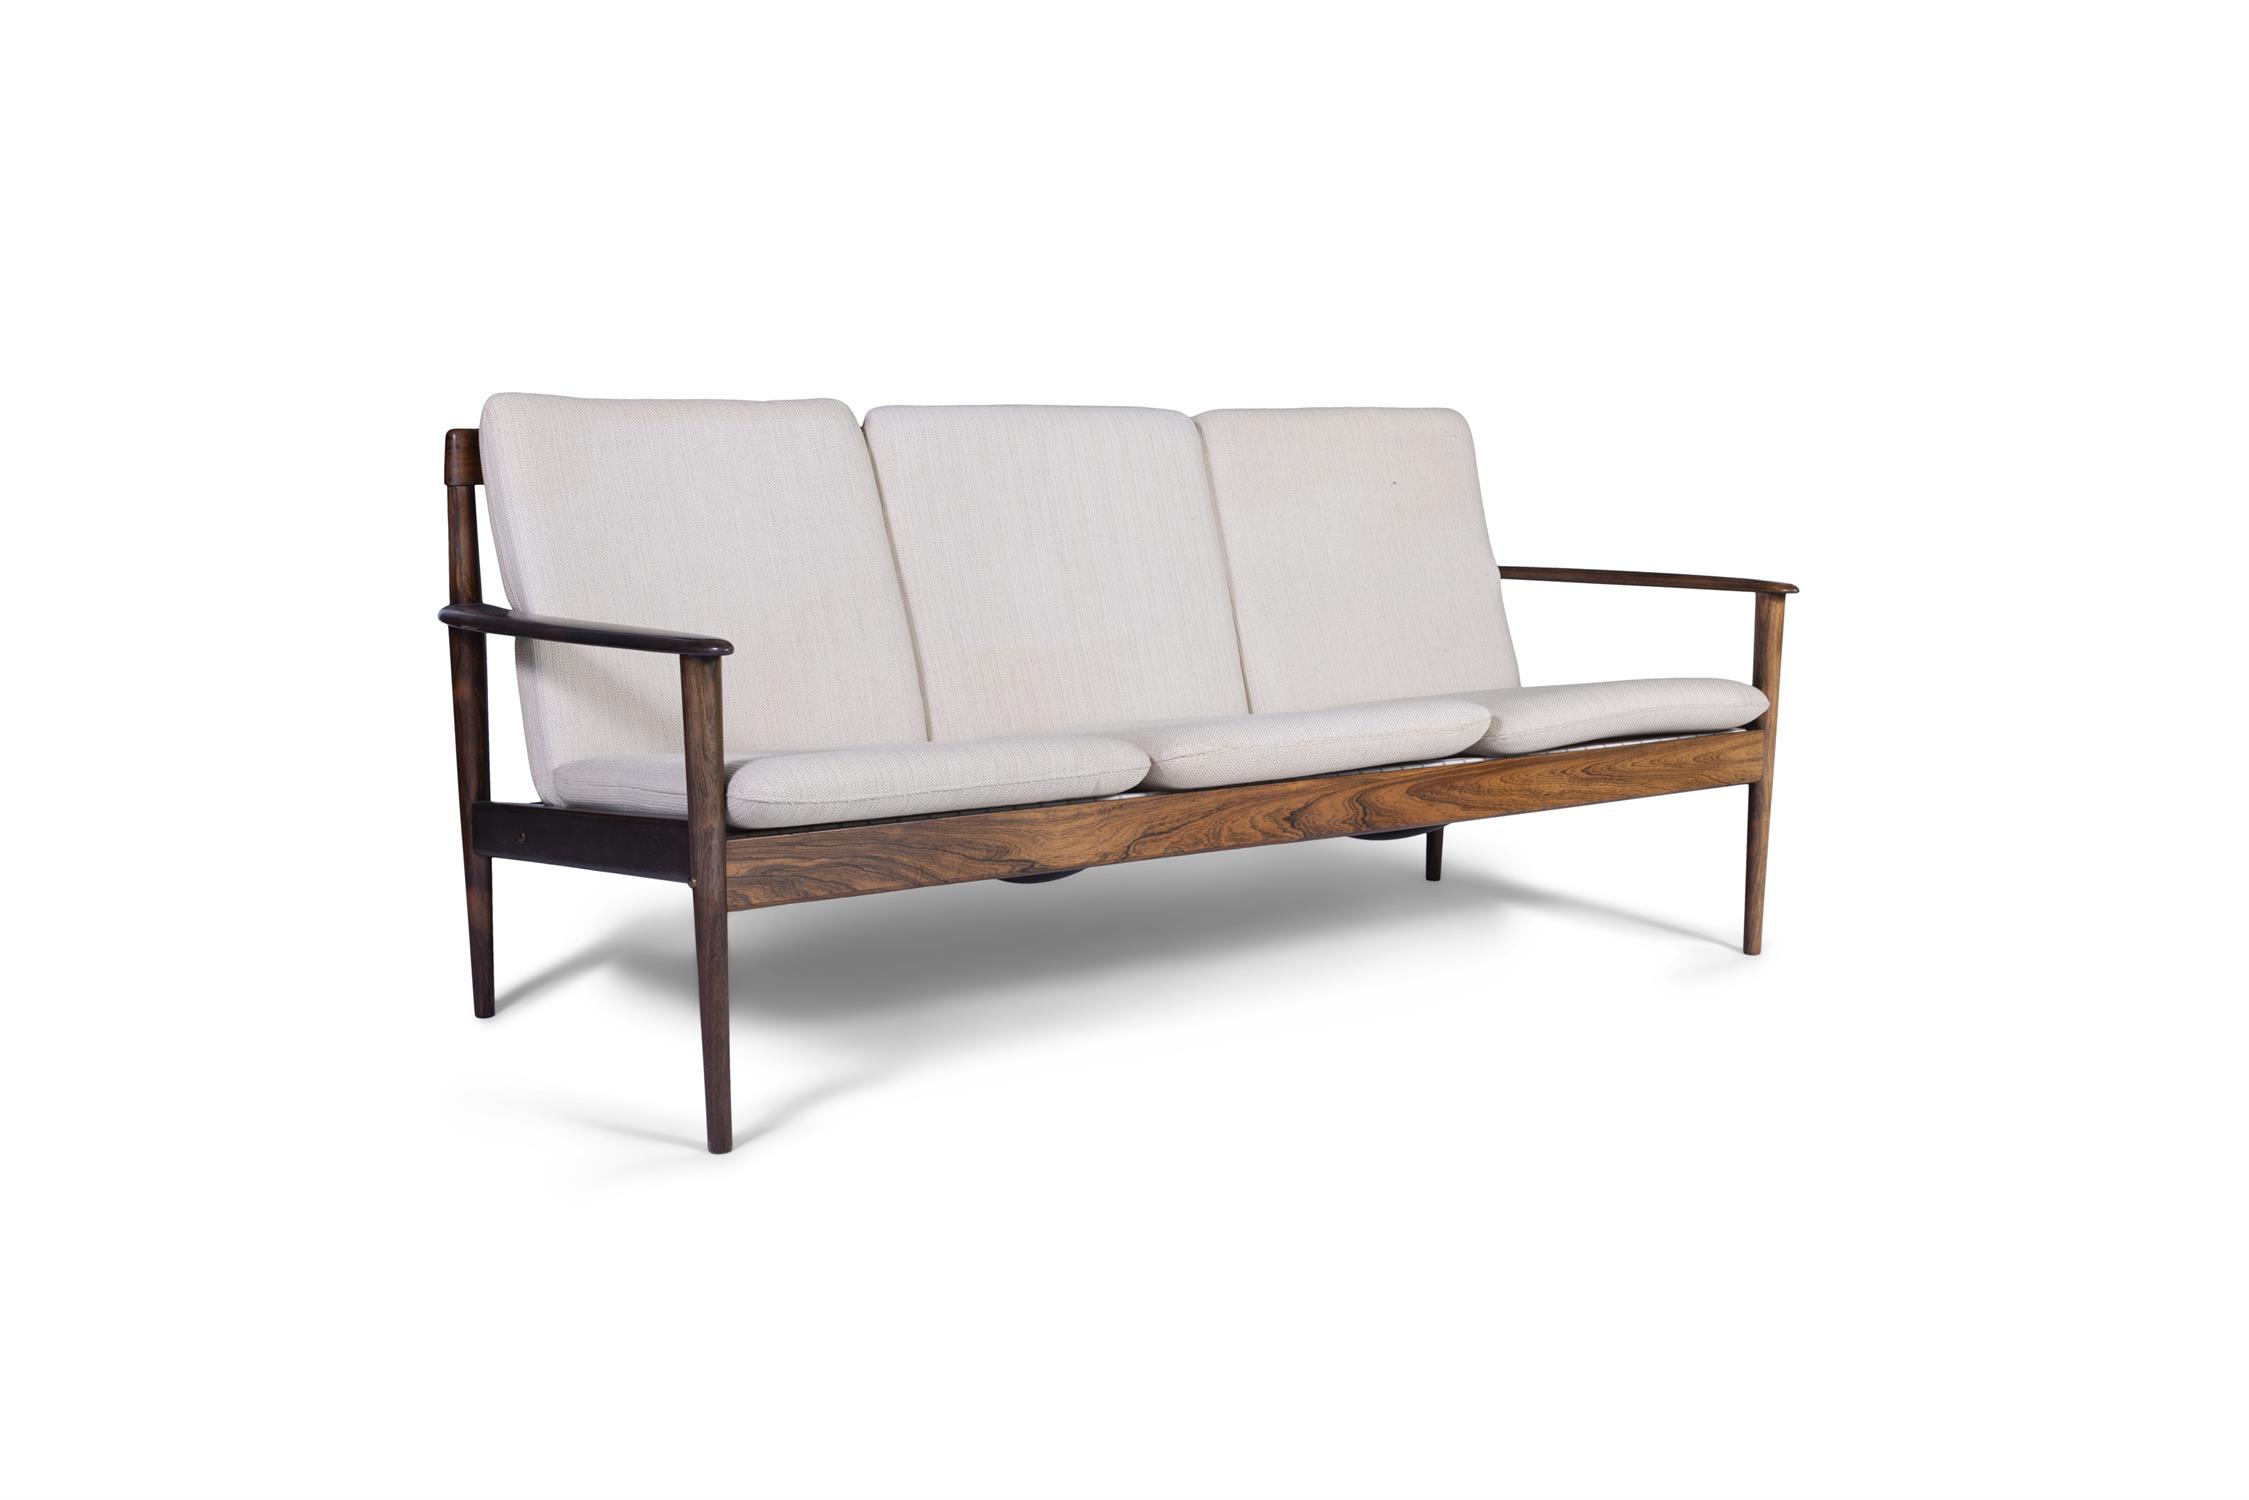 GRETE JALK (1920 - 2006) A rosewood three-seater sofa by Grete Jalk. Denmark, c. - Image 2 of 6